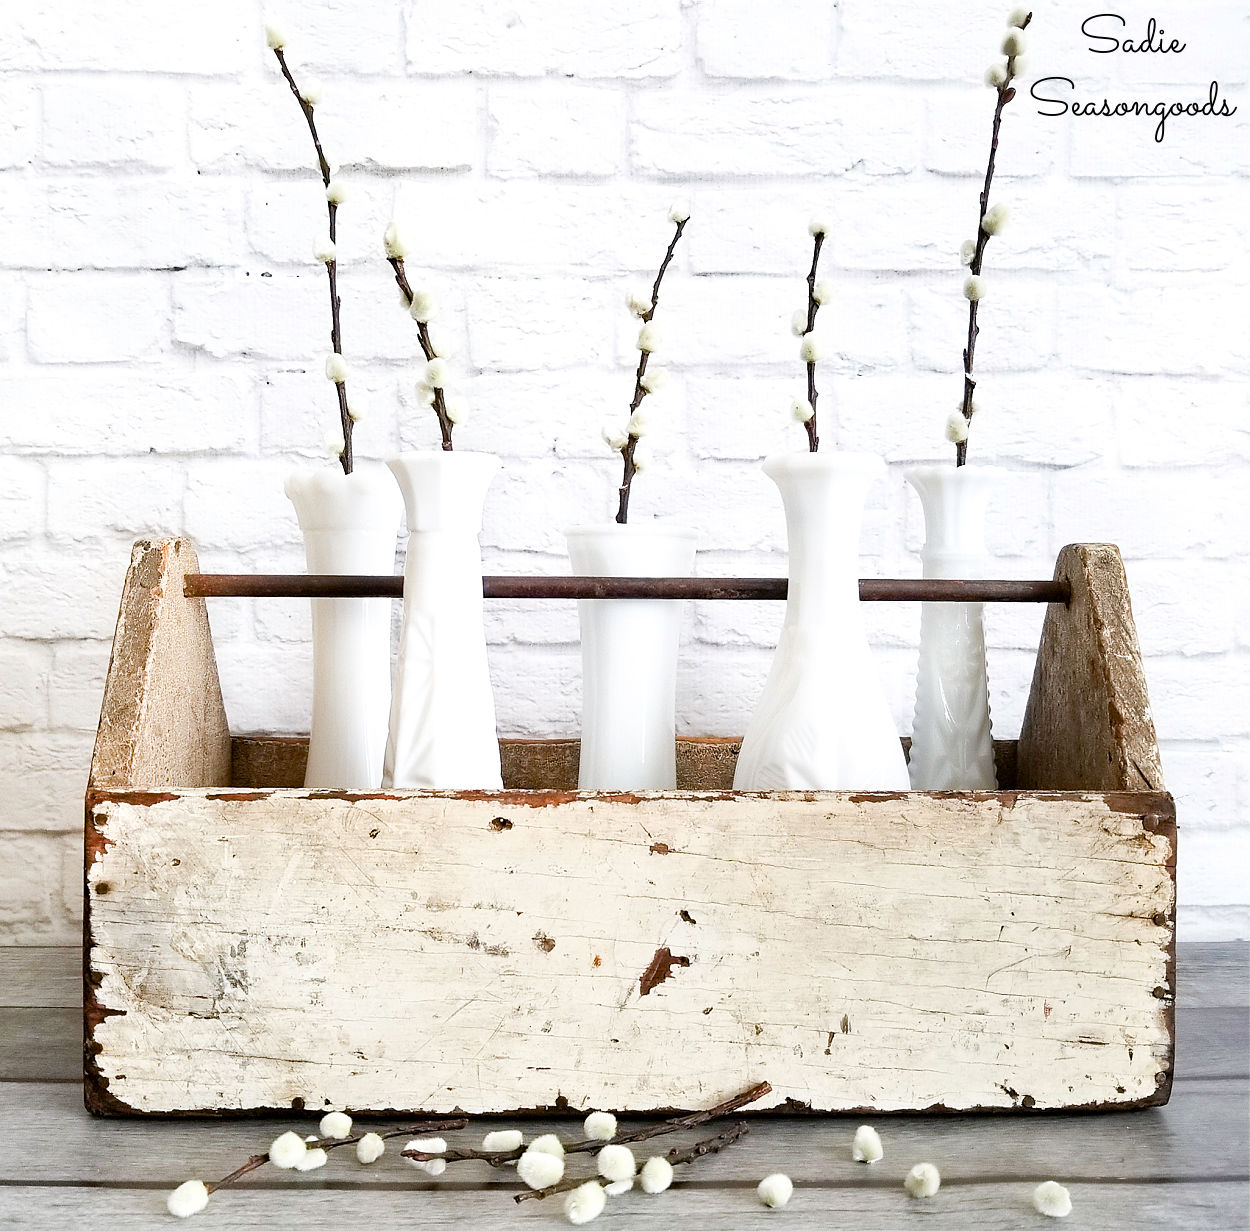 Winter decorations DIY with milk glass and pussywillows